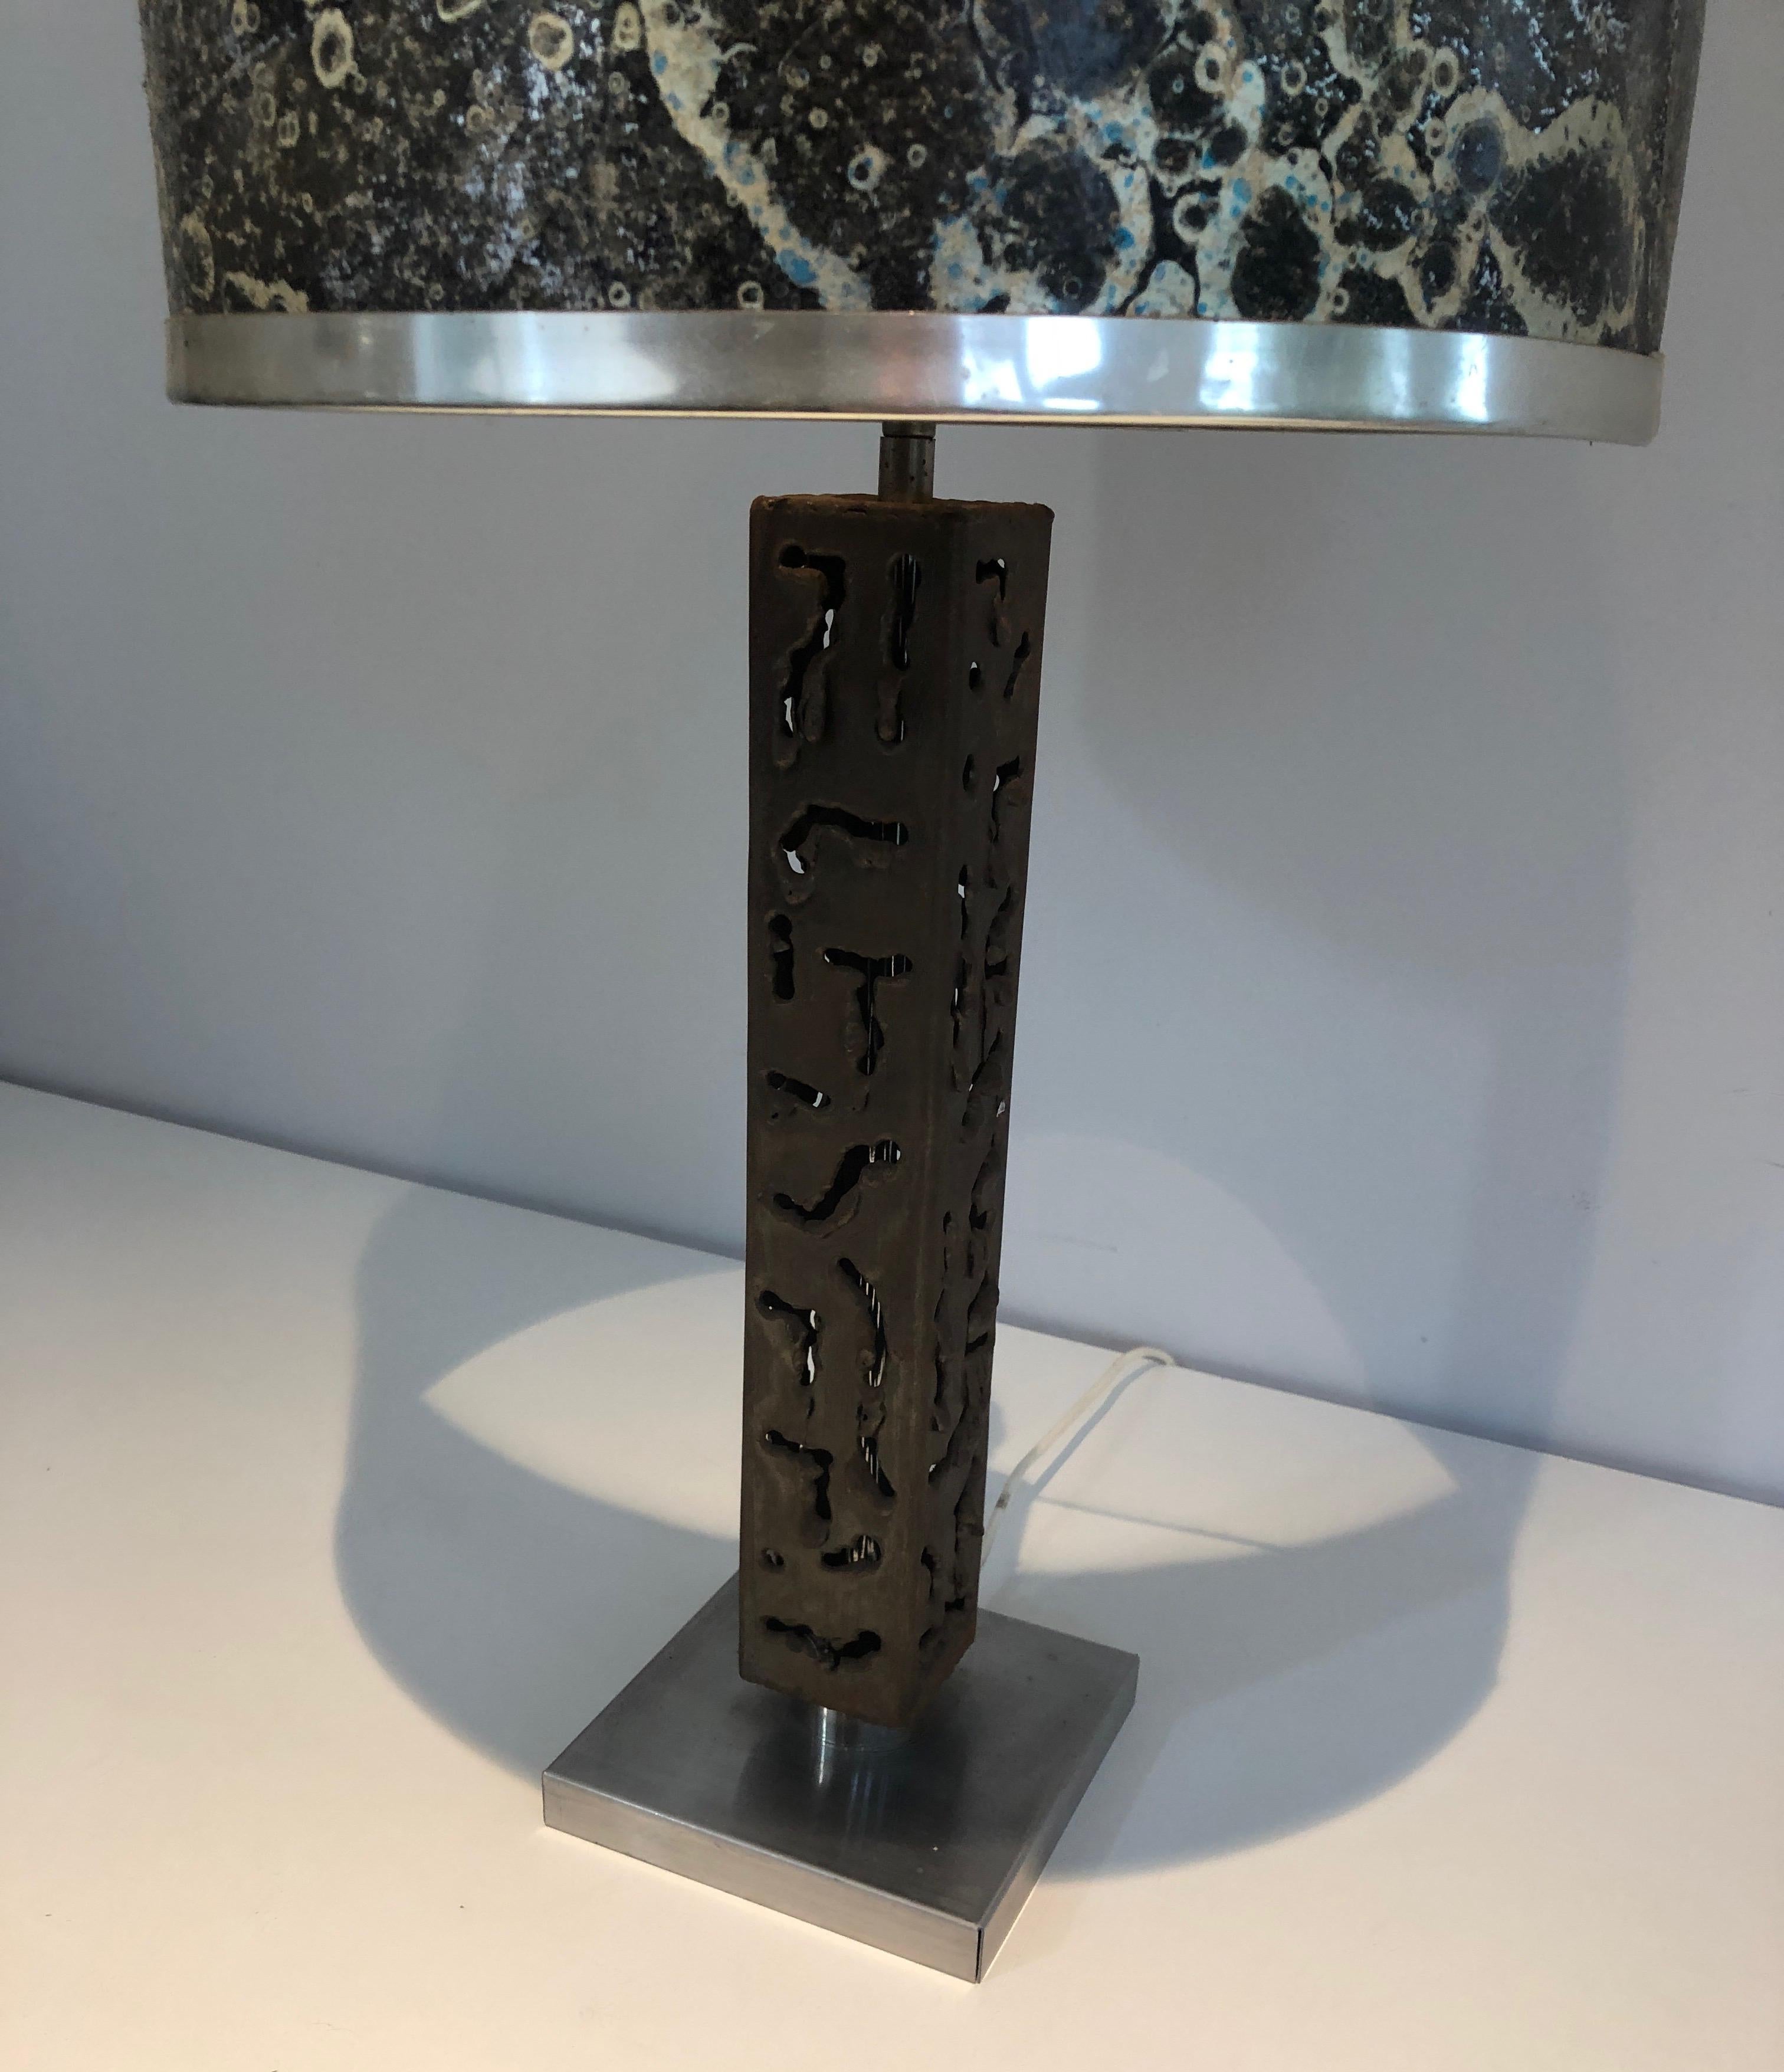 Worked Steel Design Table Lamp, French Work, circa 1970 For Sale 5